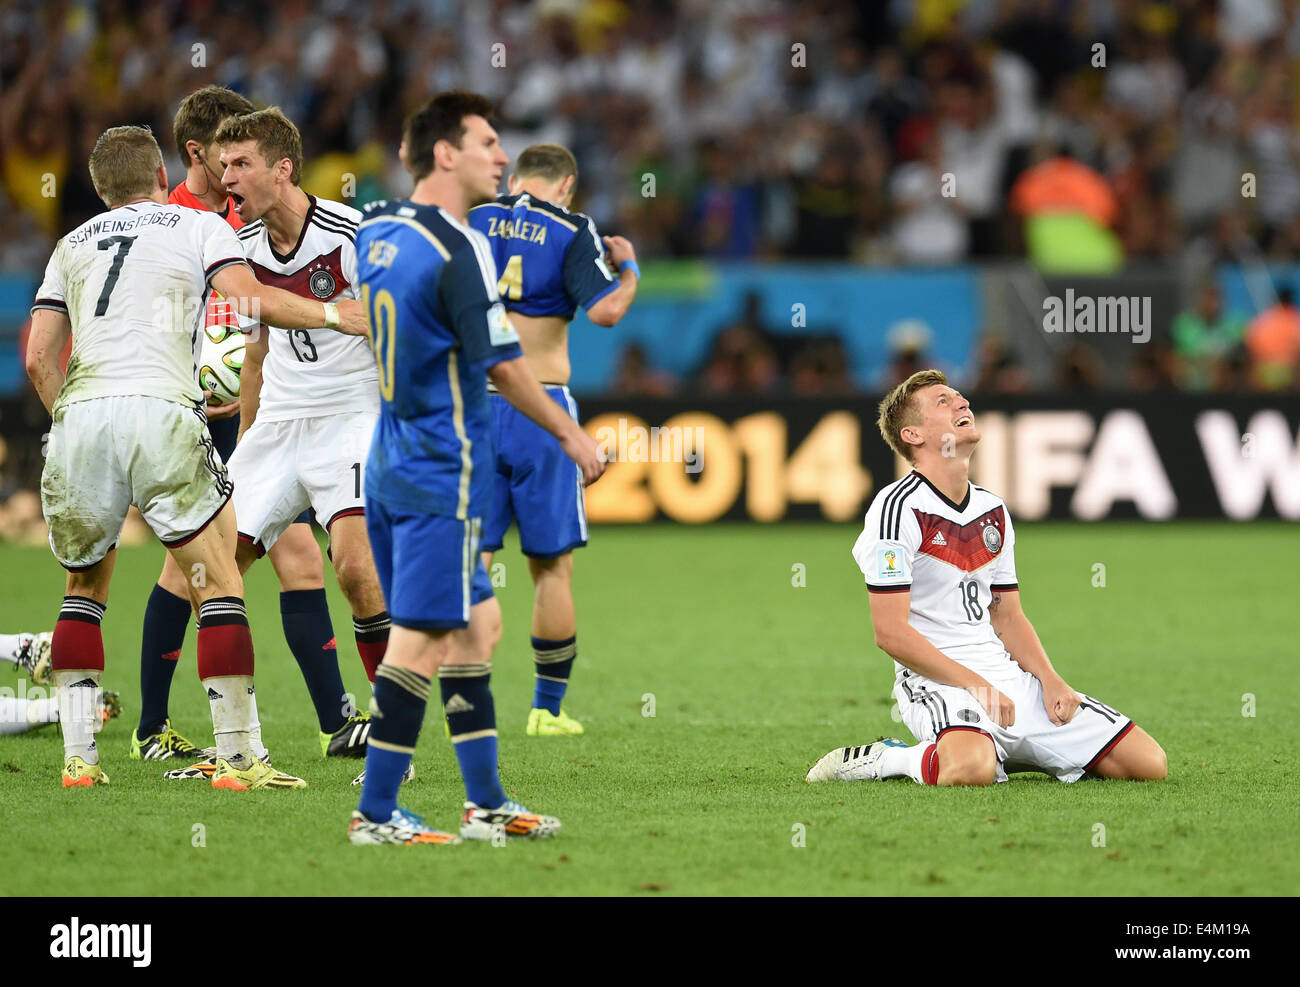 Rio de Janeiro, Brazil. 13th July, 2014. Toni Kroos (R) of Germany celebrates after winning the FIFA World Cup 2014 final soccer match between Germany and Argentina at the Estadio do Maracana in Rio de Janeiro, Brazil, 13 July 2014. Photo: Andreas Gebert/dpa/Alamy Live News Stock Photo